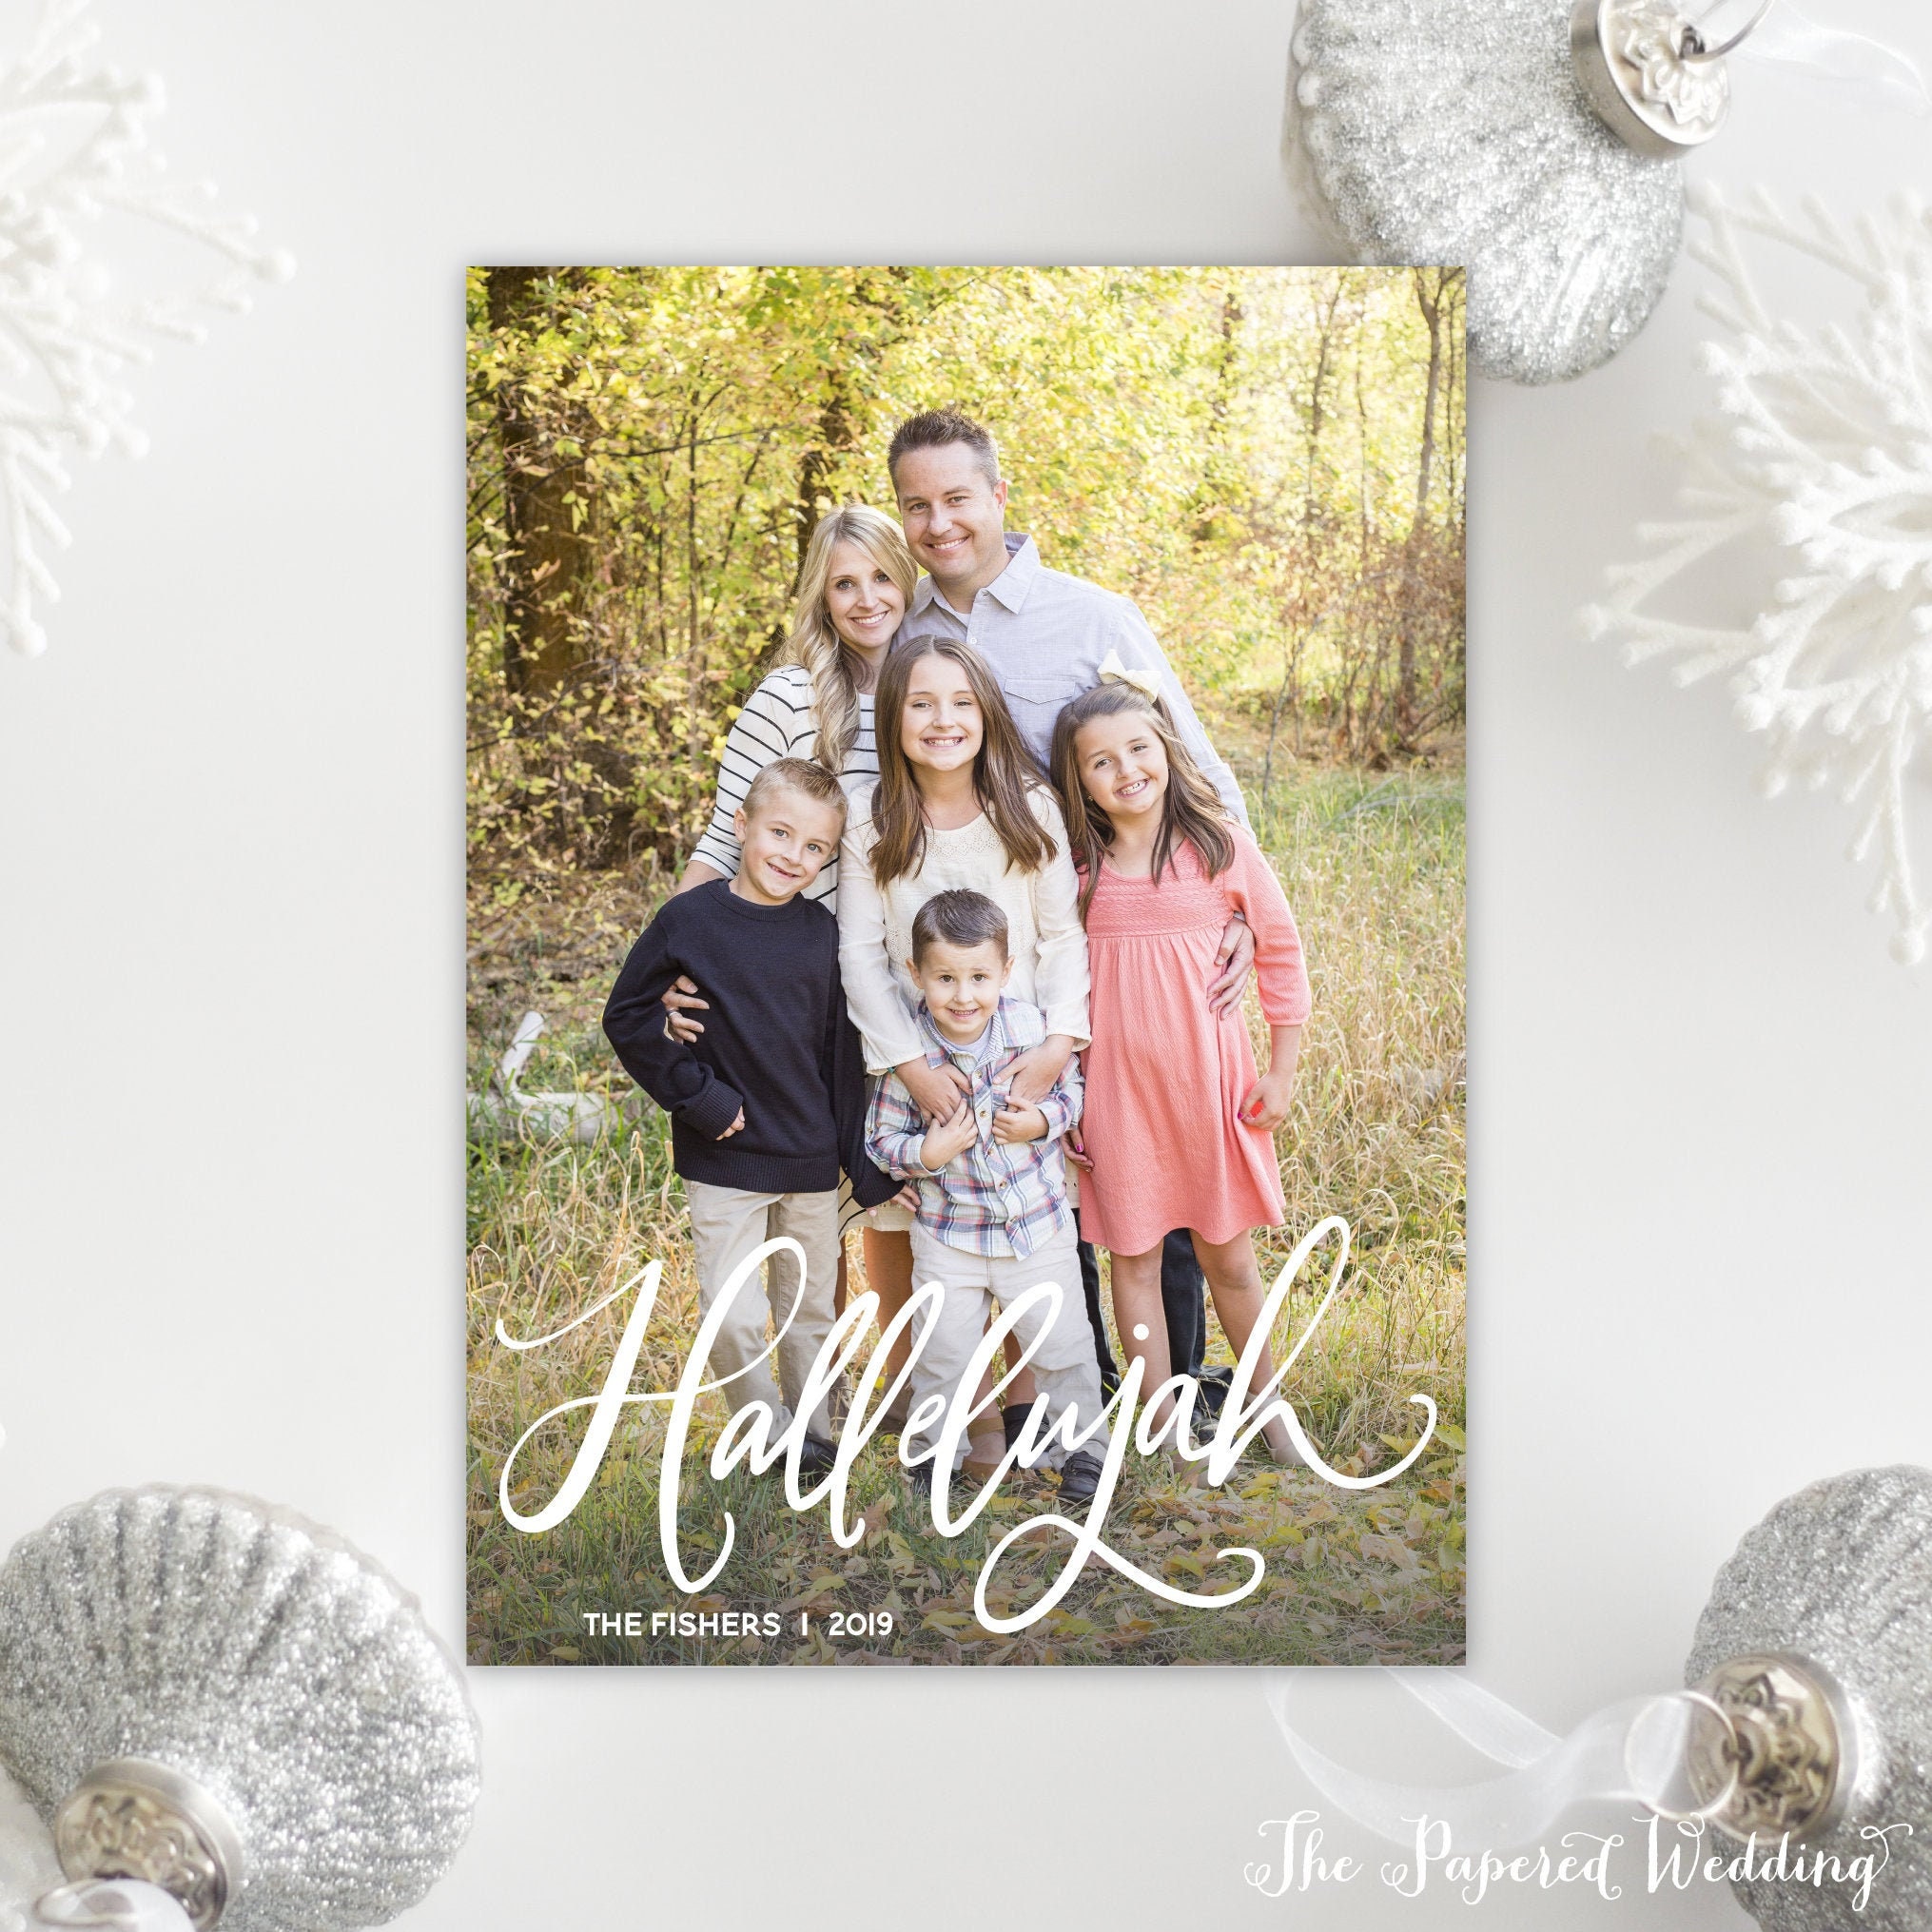 Printable Or Printed Hallelujah Christmas Cards - One Vertical Picture With Hand-Lettered Wording 084 P1"